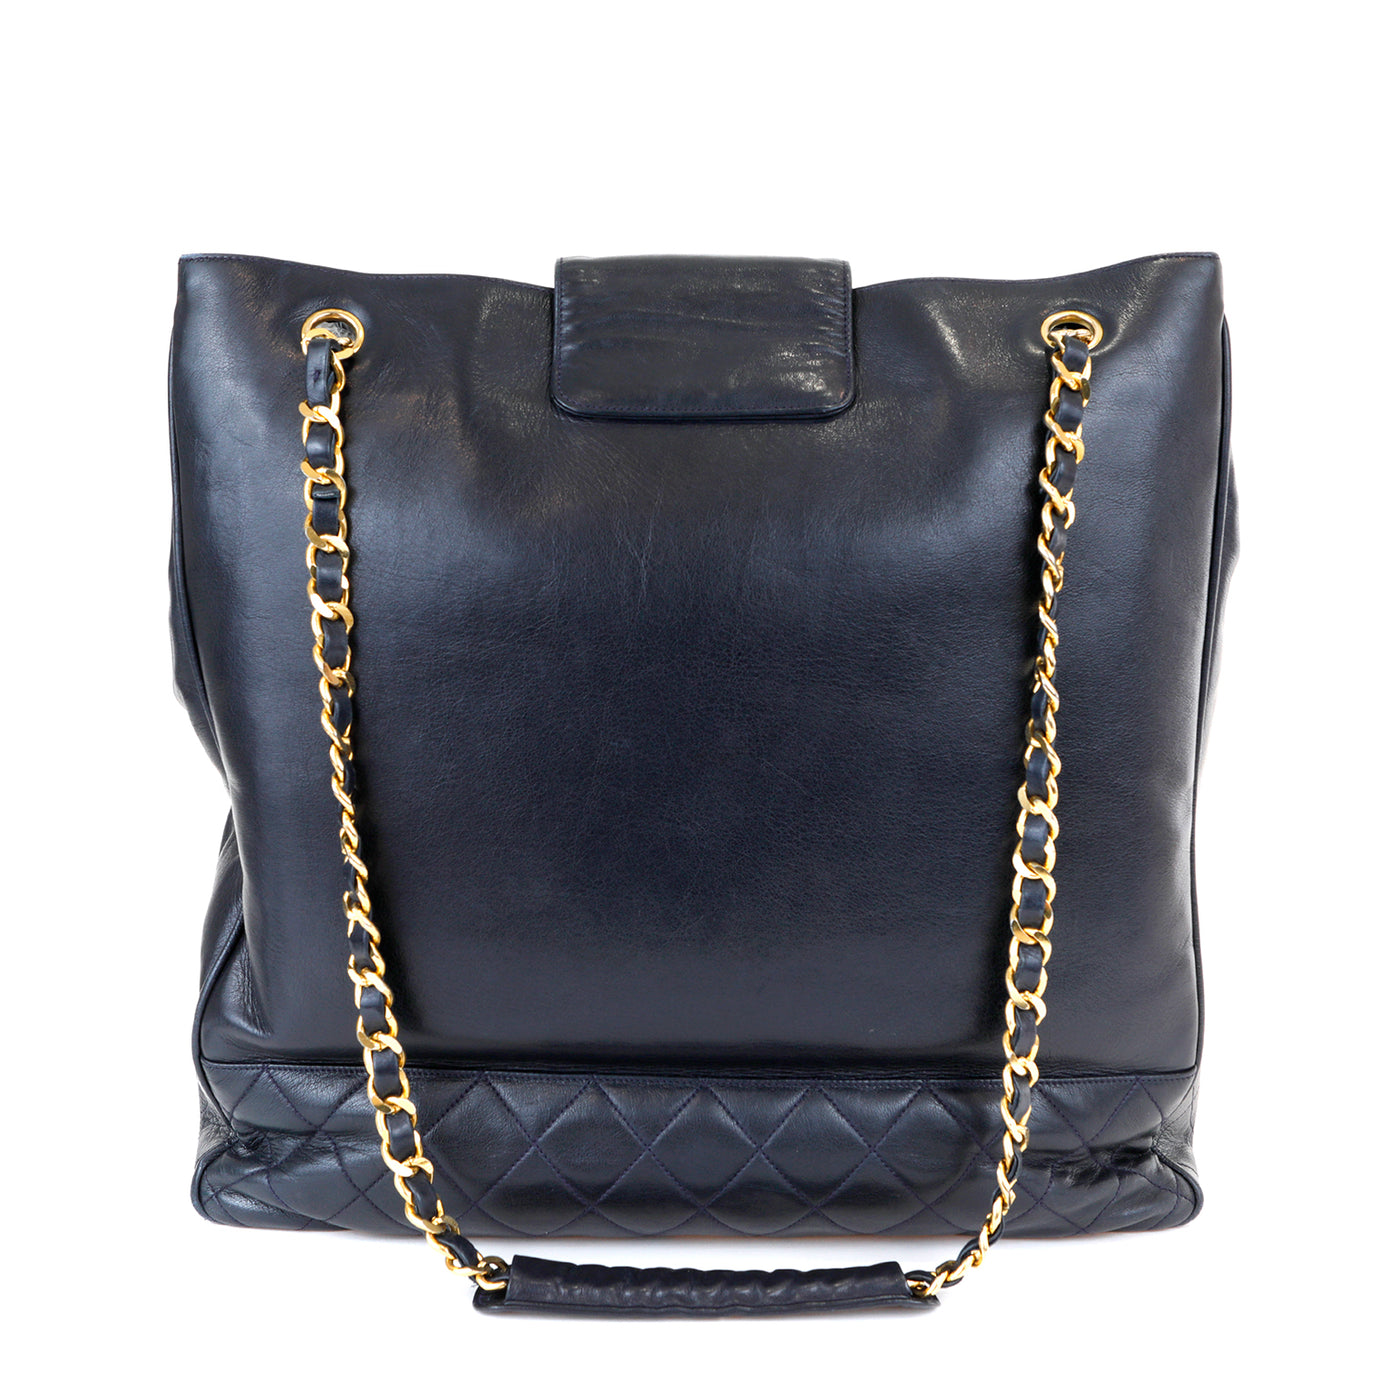 Chanel Vintage Navy Blue Lambskin Tote with Gold Hardware